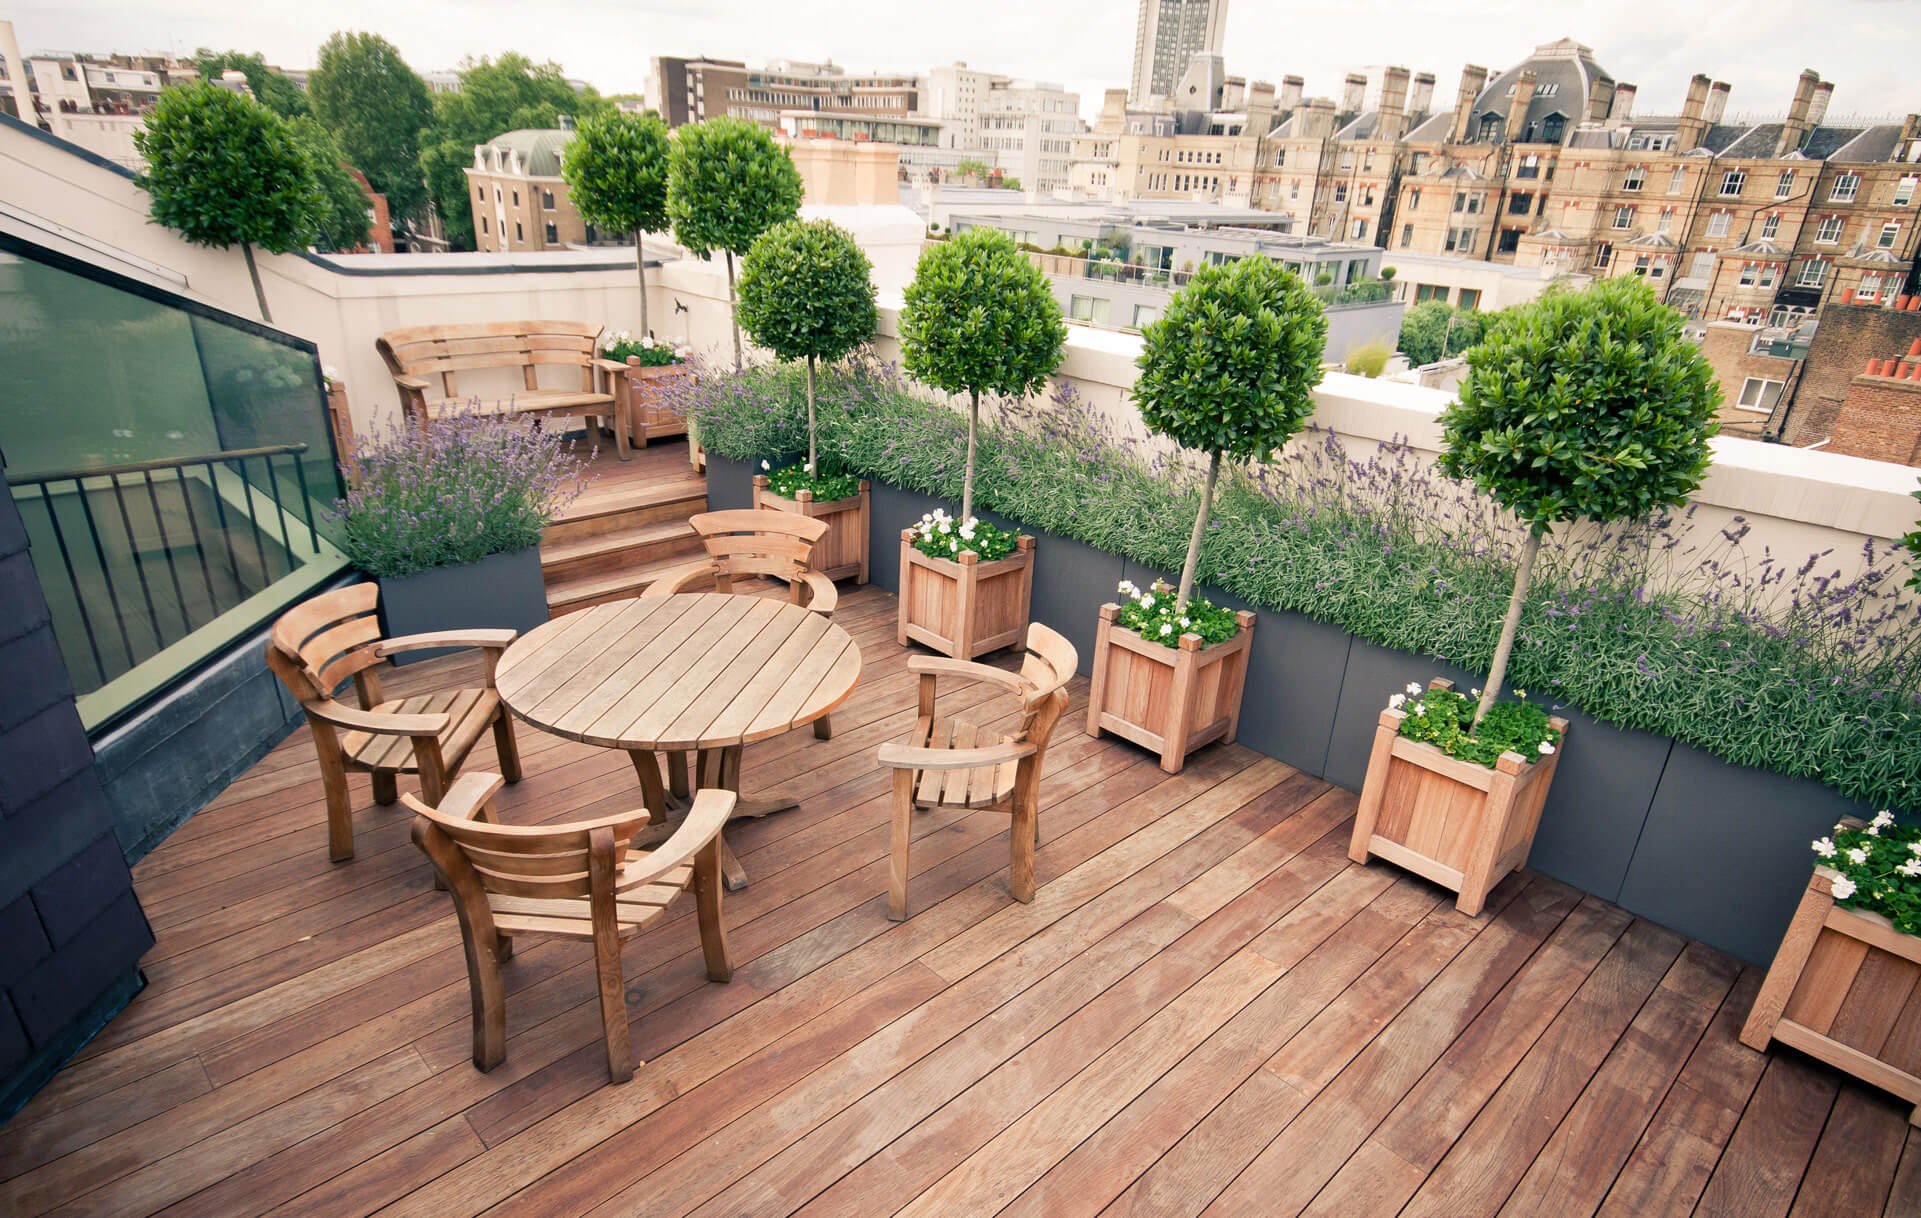 Revamp Your Boring Terrace With These Magnificent Roof Garden Ideas.